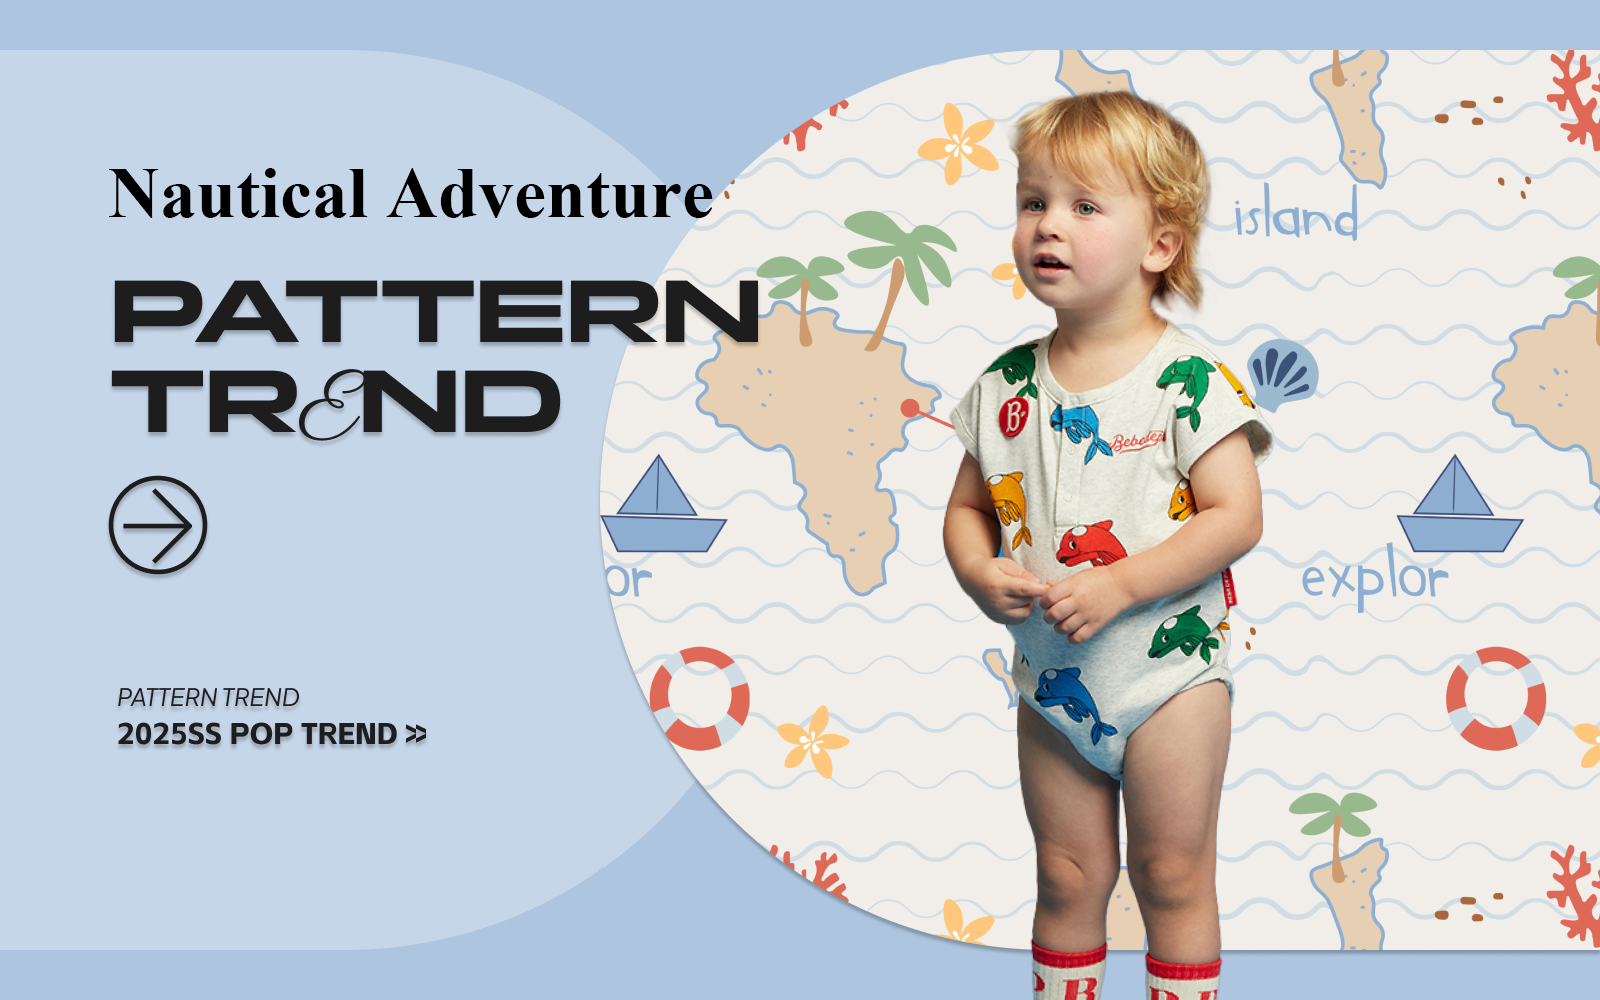 Nautical Adventure -- The Pattern Trend for Kidswear